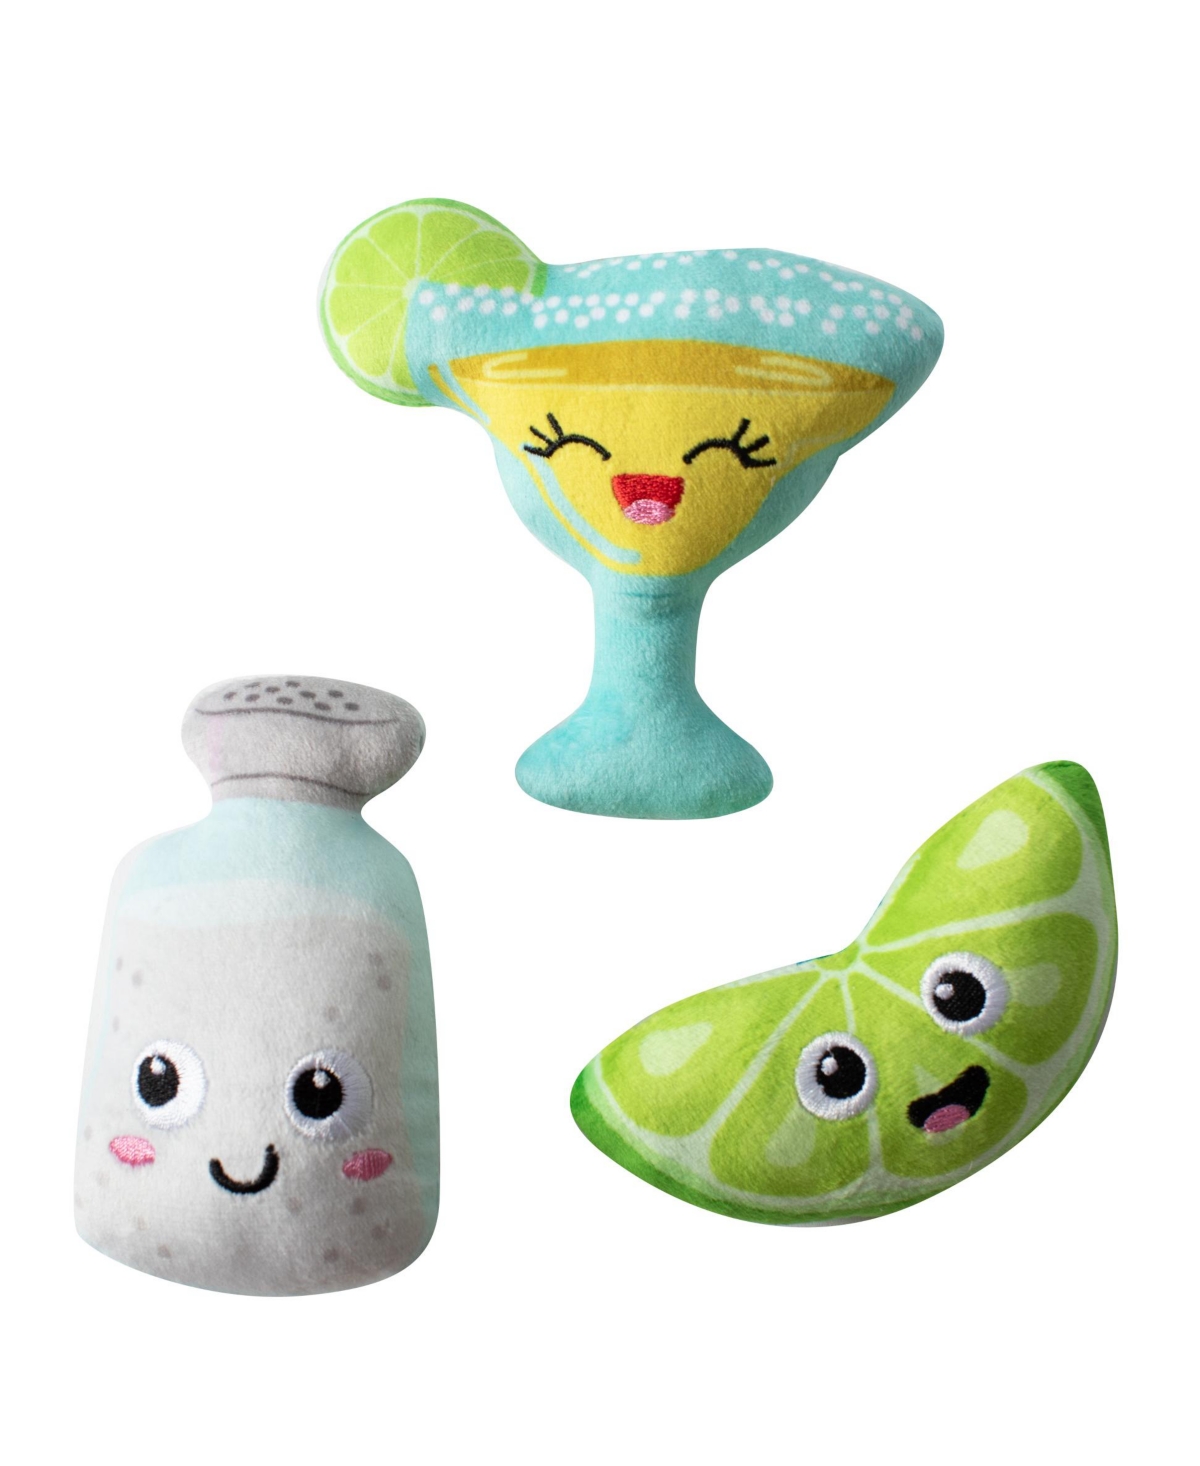 On Margarita Time 3 Piece Small Dog Toy Set - Multi